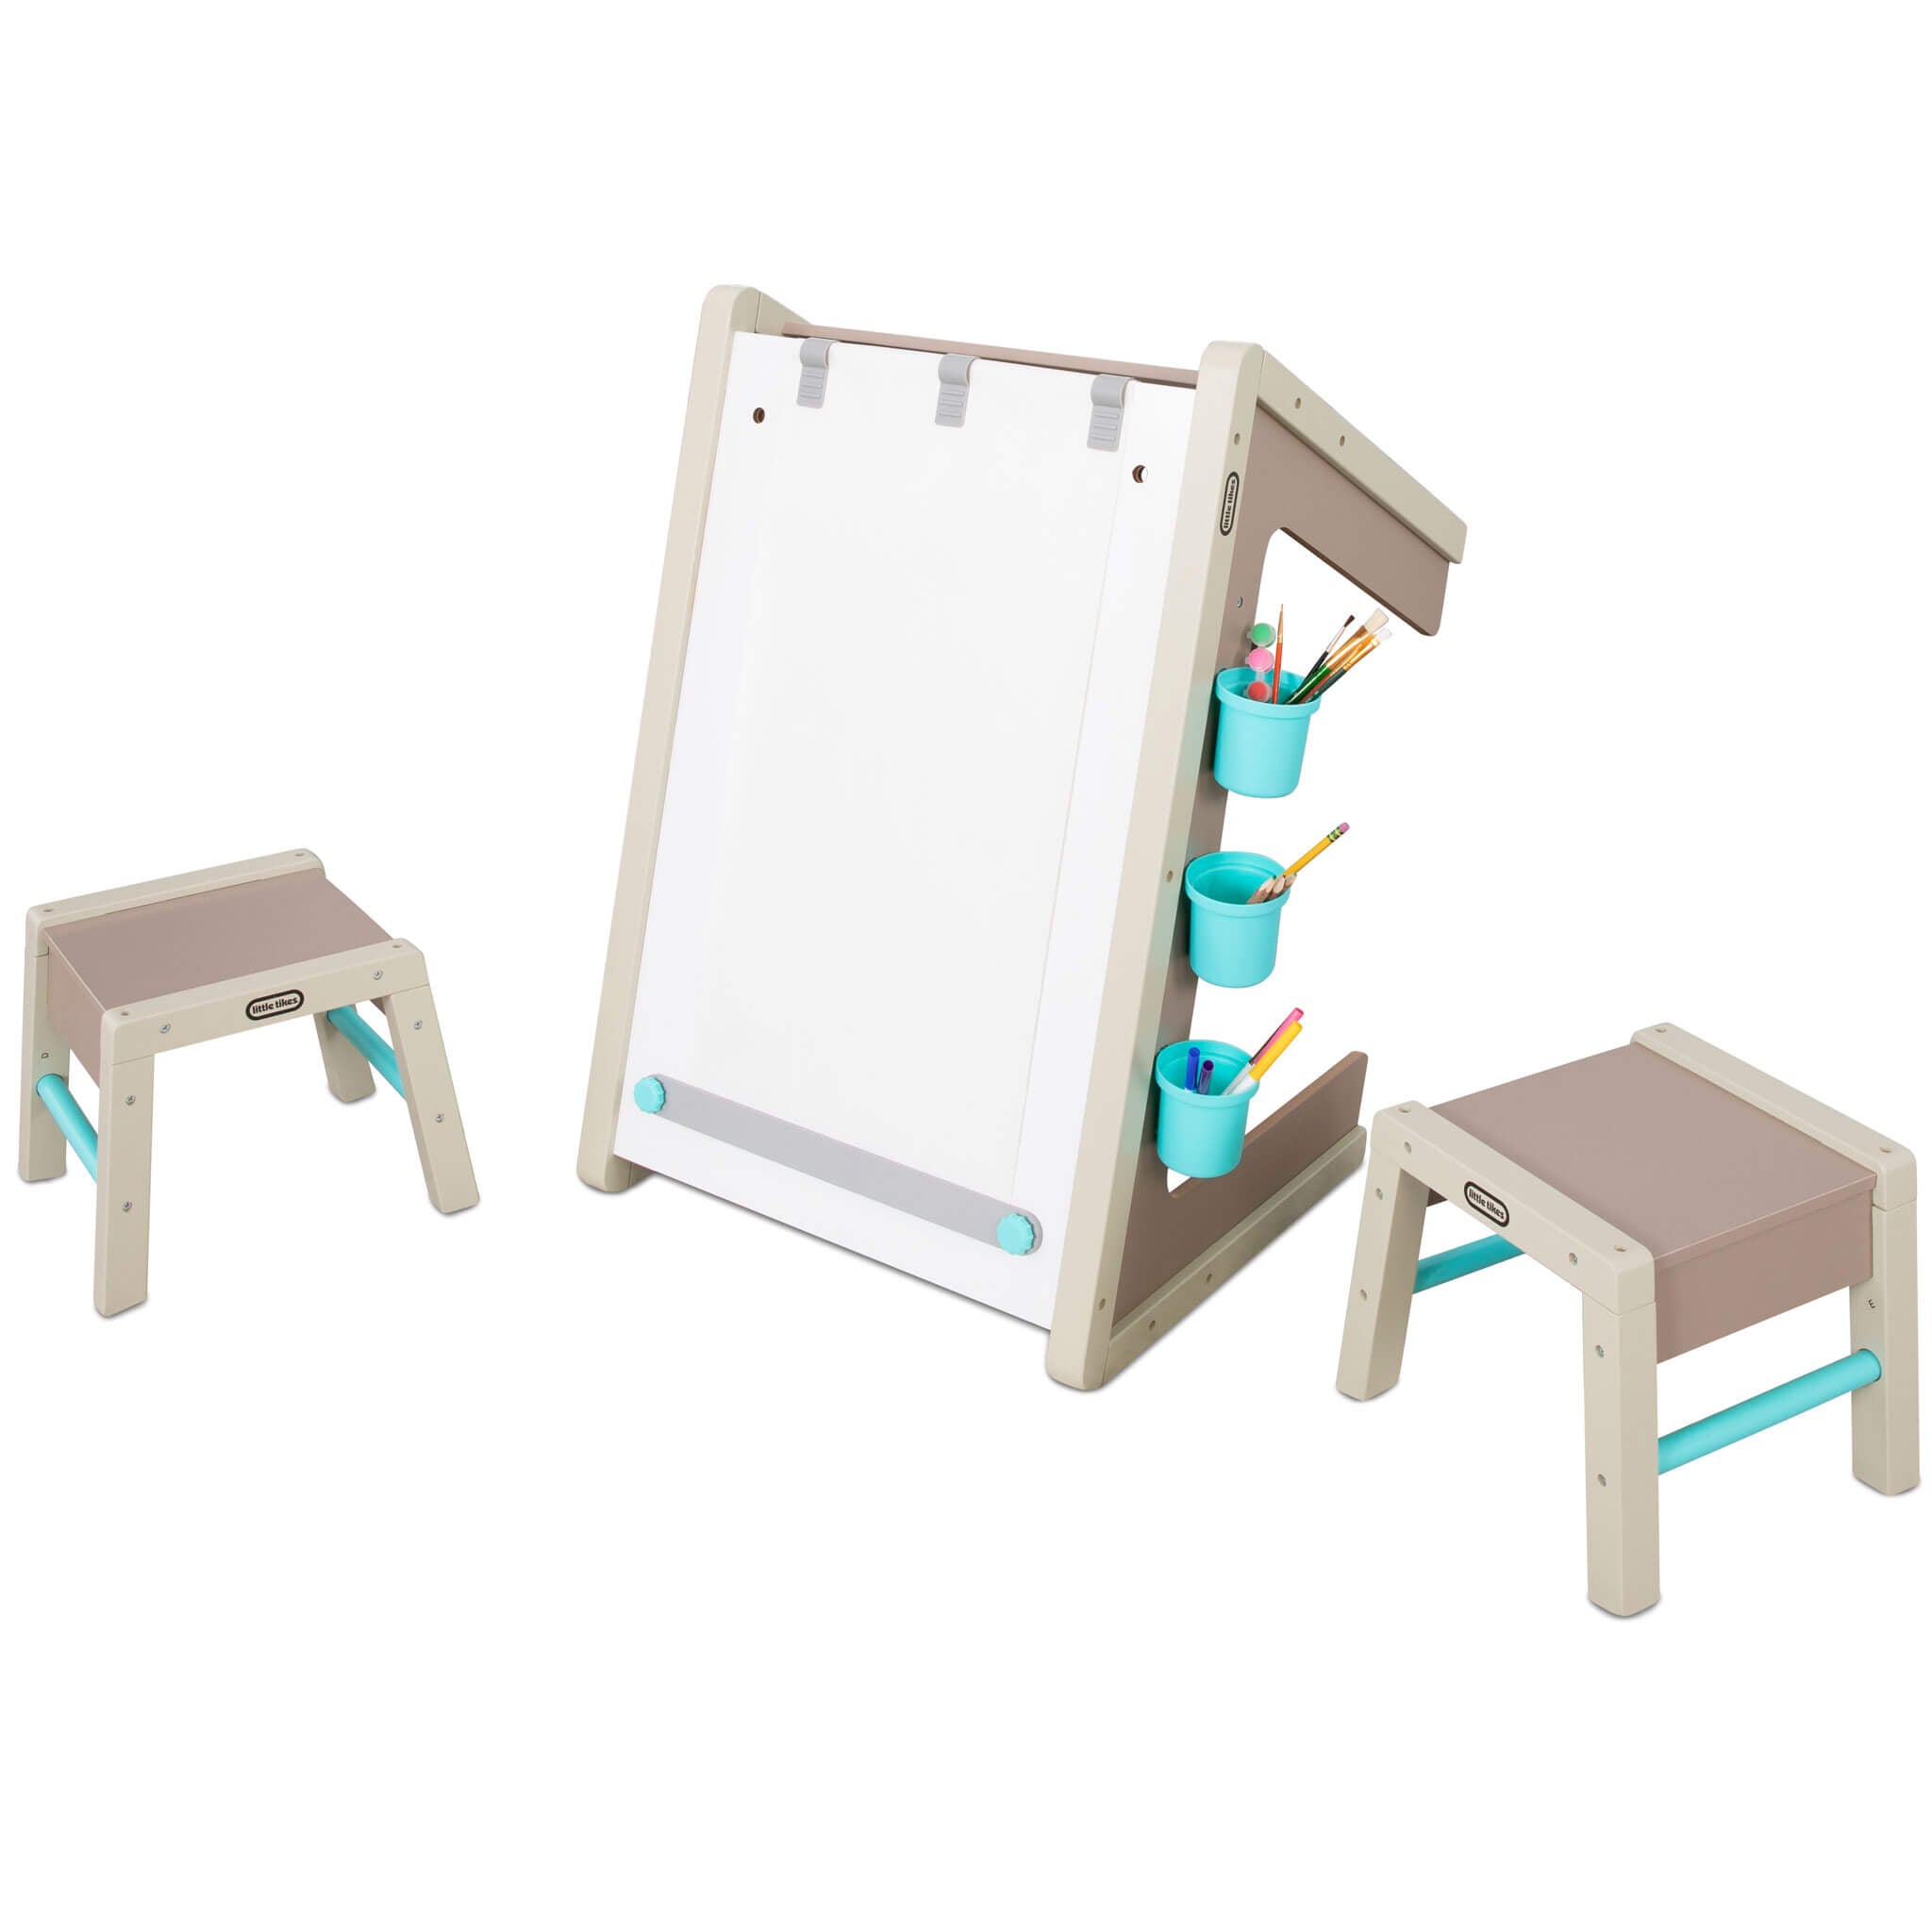 4 Pack: Tabletop Easel by Creatology™